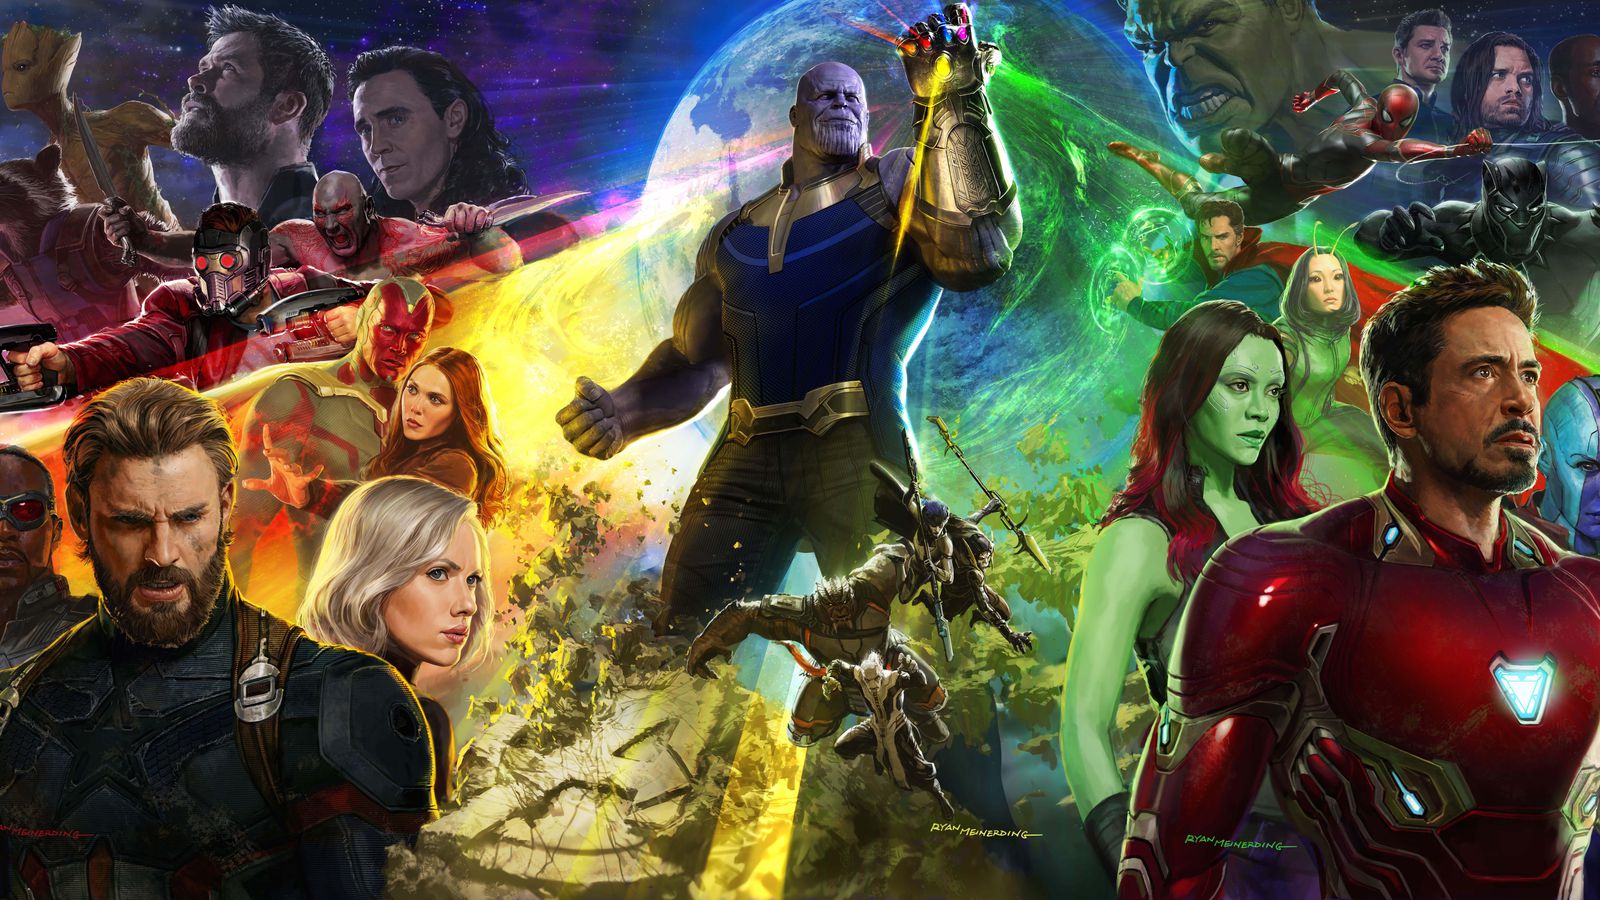 Box Office UPDATE: “Avengers: Infinity War” Flies to BIGGEST Opening Weekend  Ever with $ Mil US, Total Worldwide $630 Million | Showbiz411